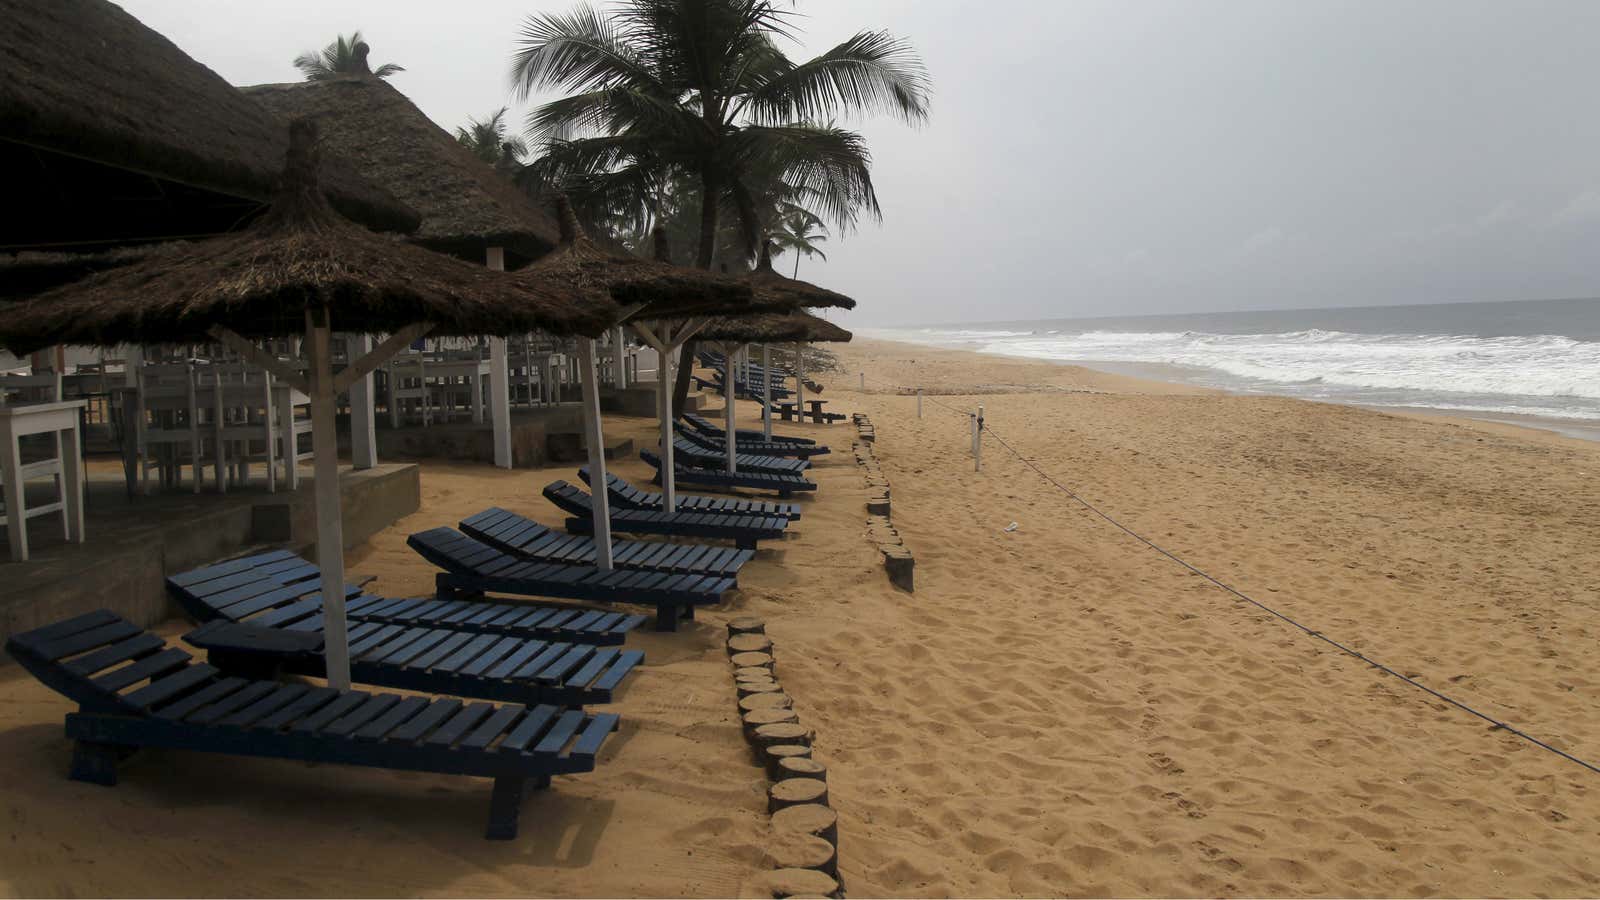 Cote d’Ivoire’s resorts may be empty for a while following the Grand Bassam attack.